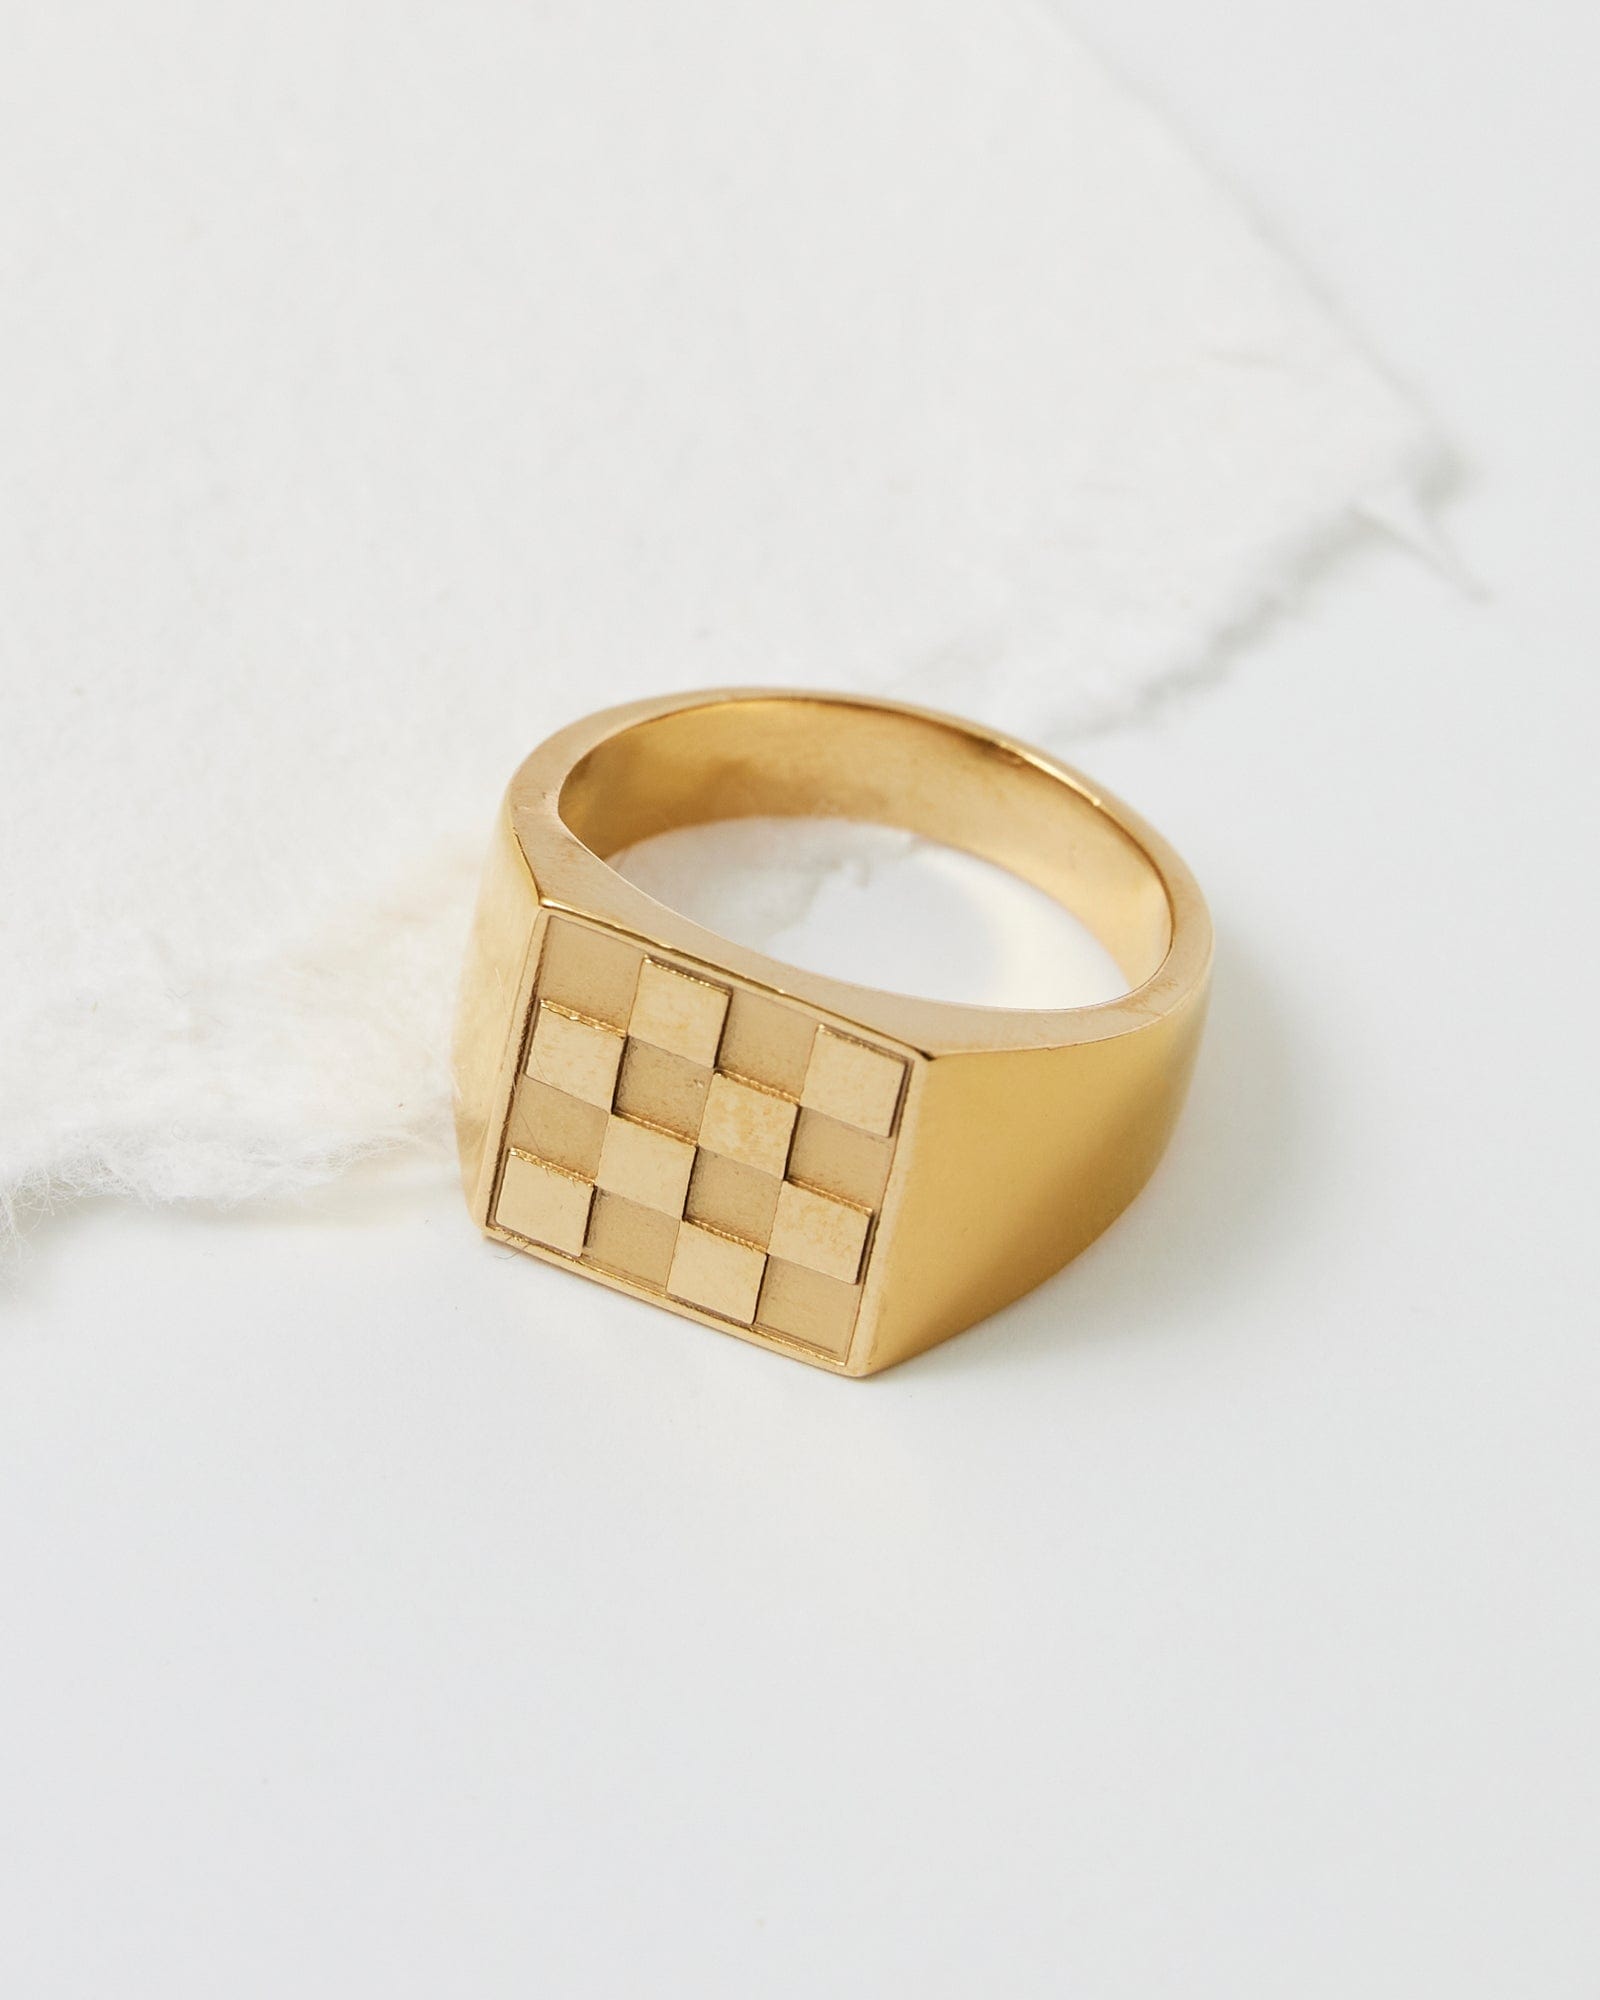 Gold ring with checkered pattern design